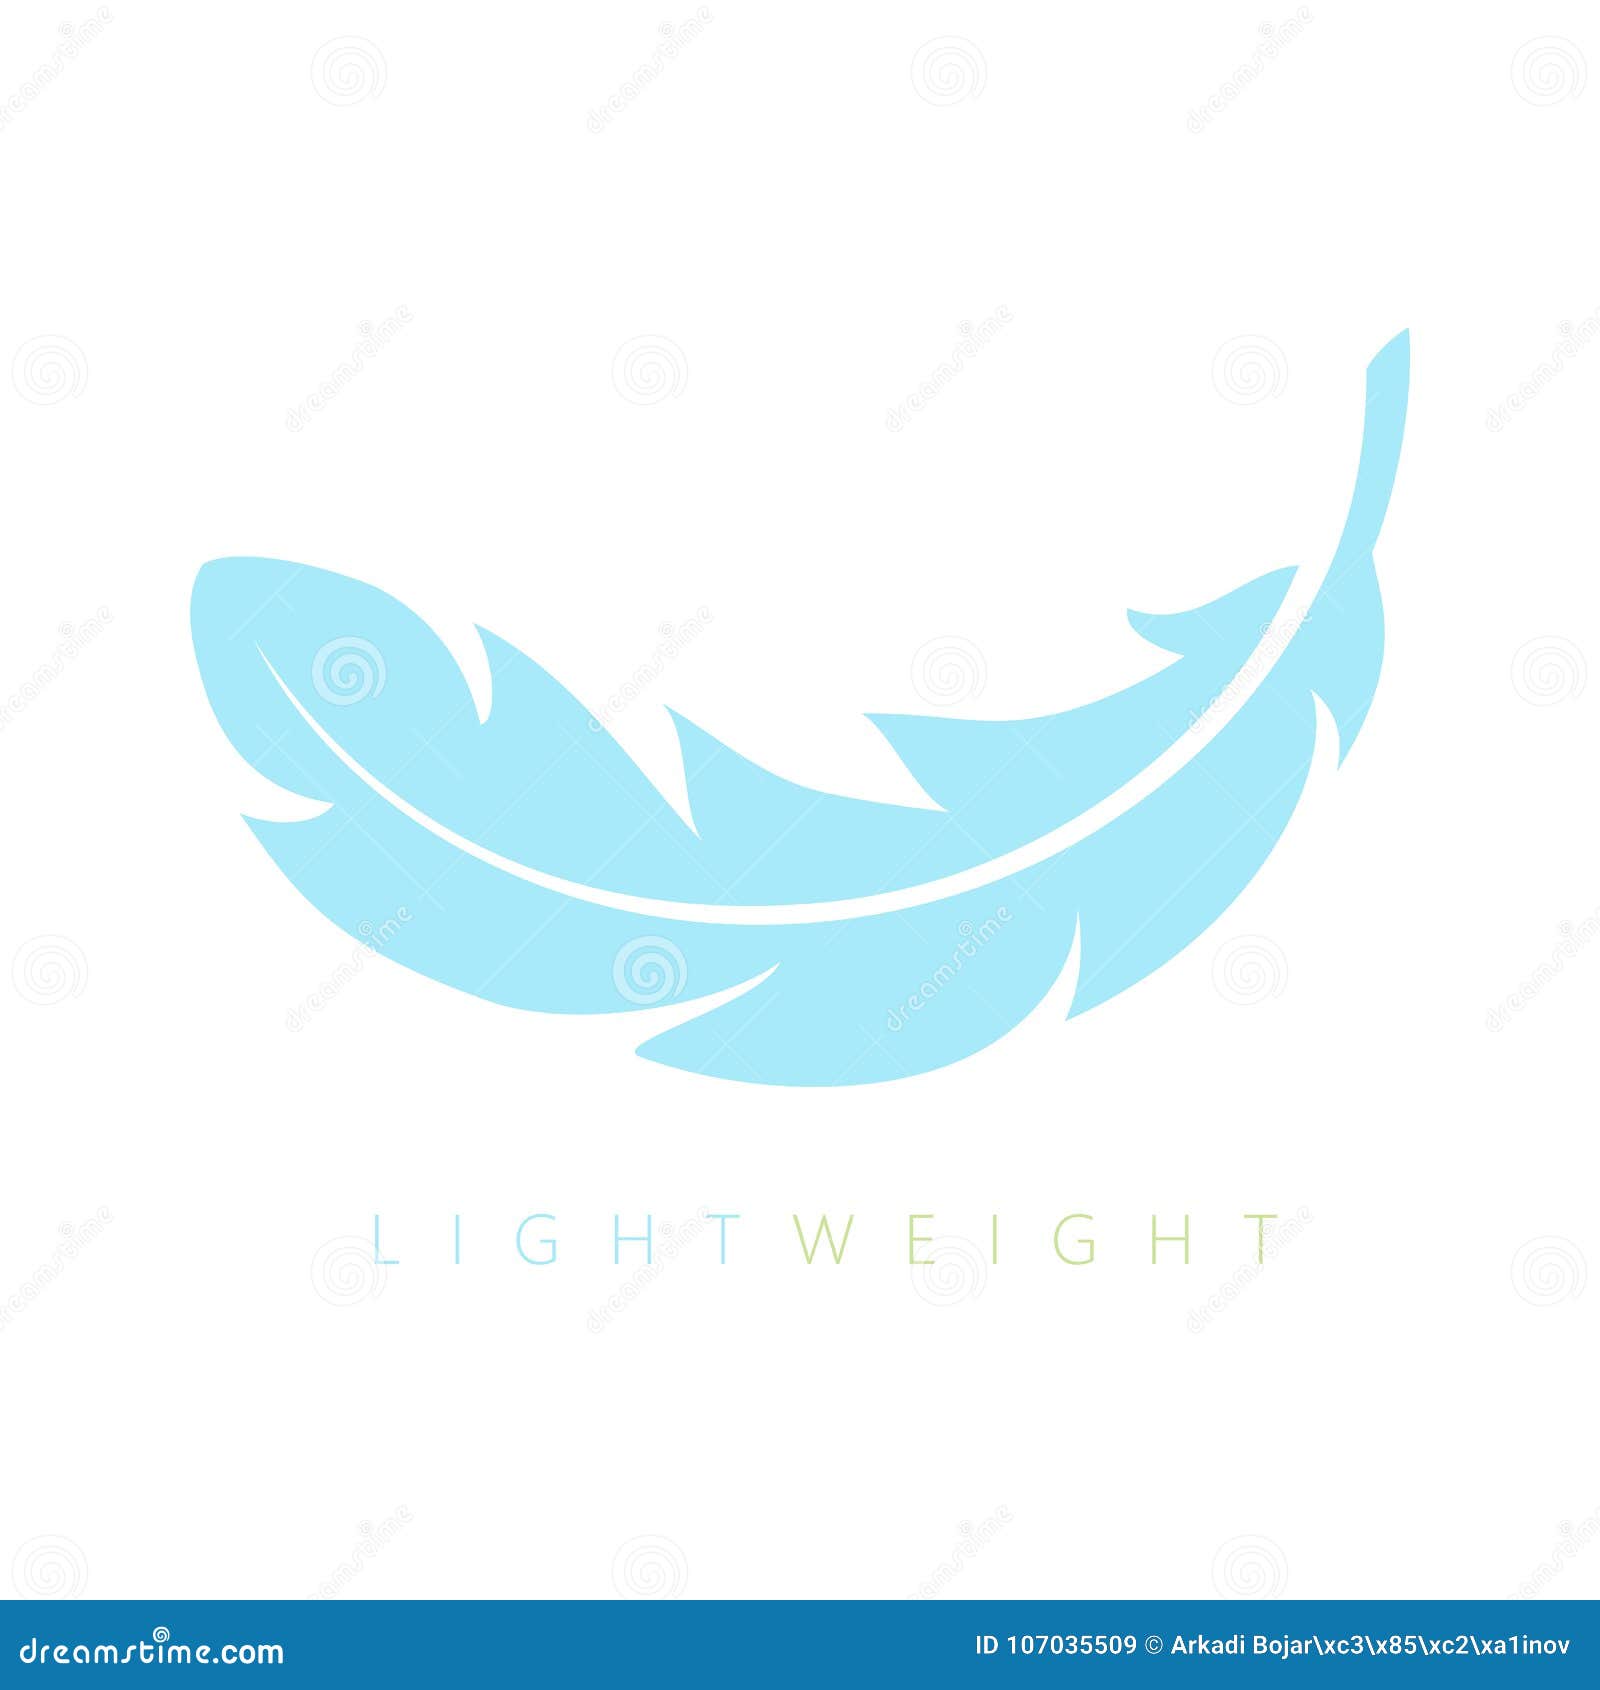 lightweight feather  icon